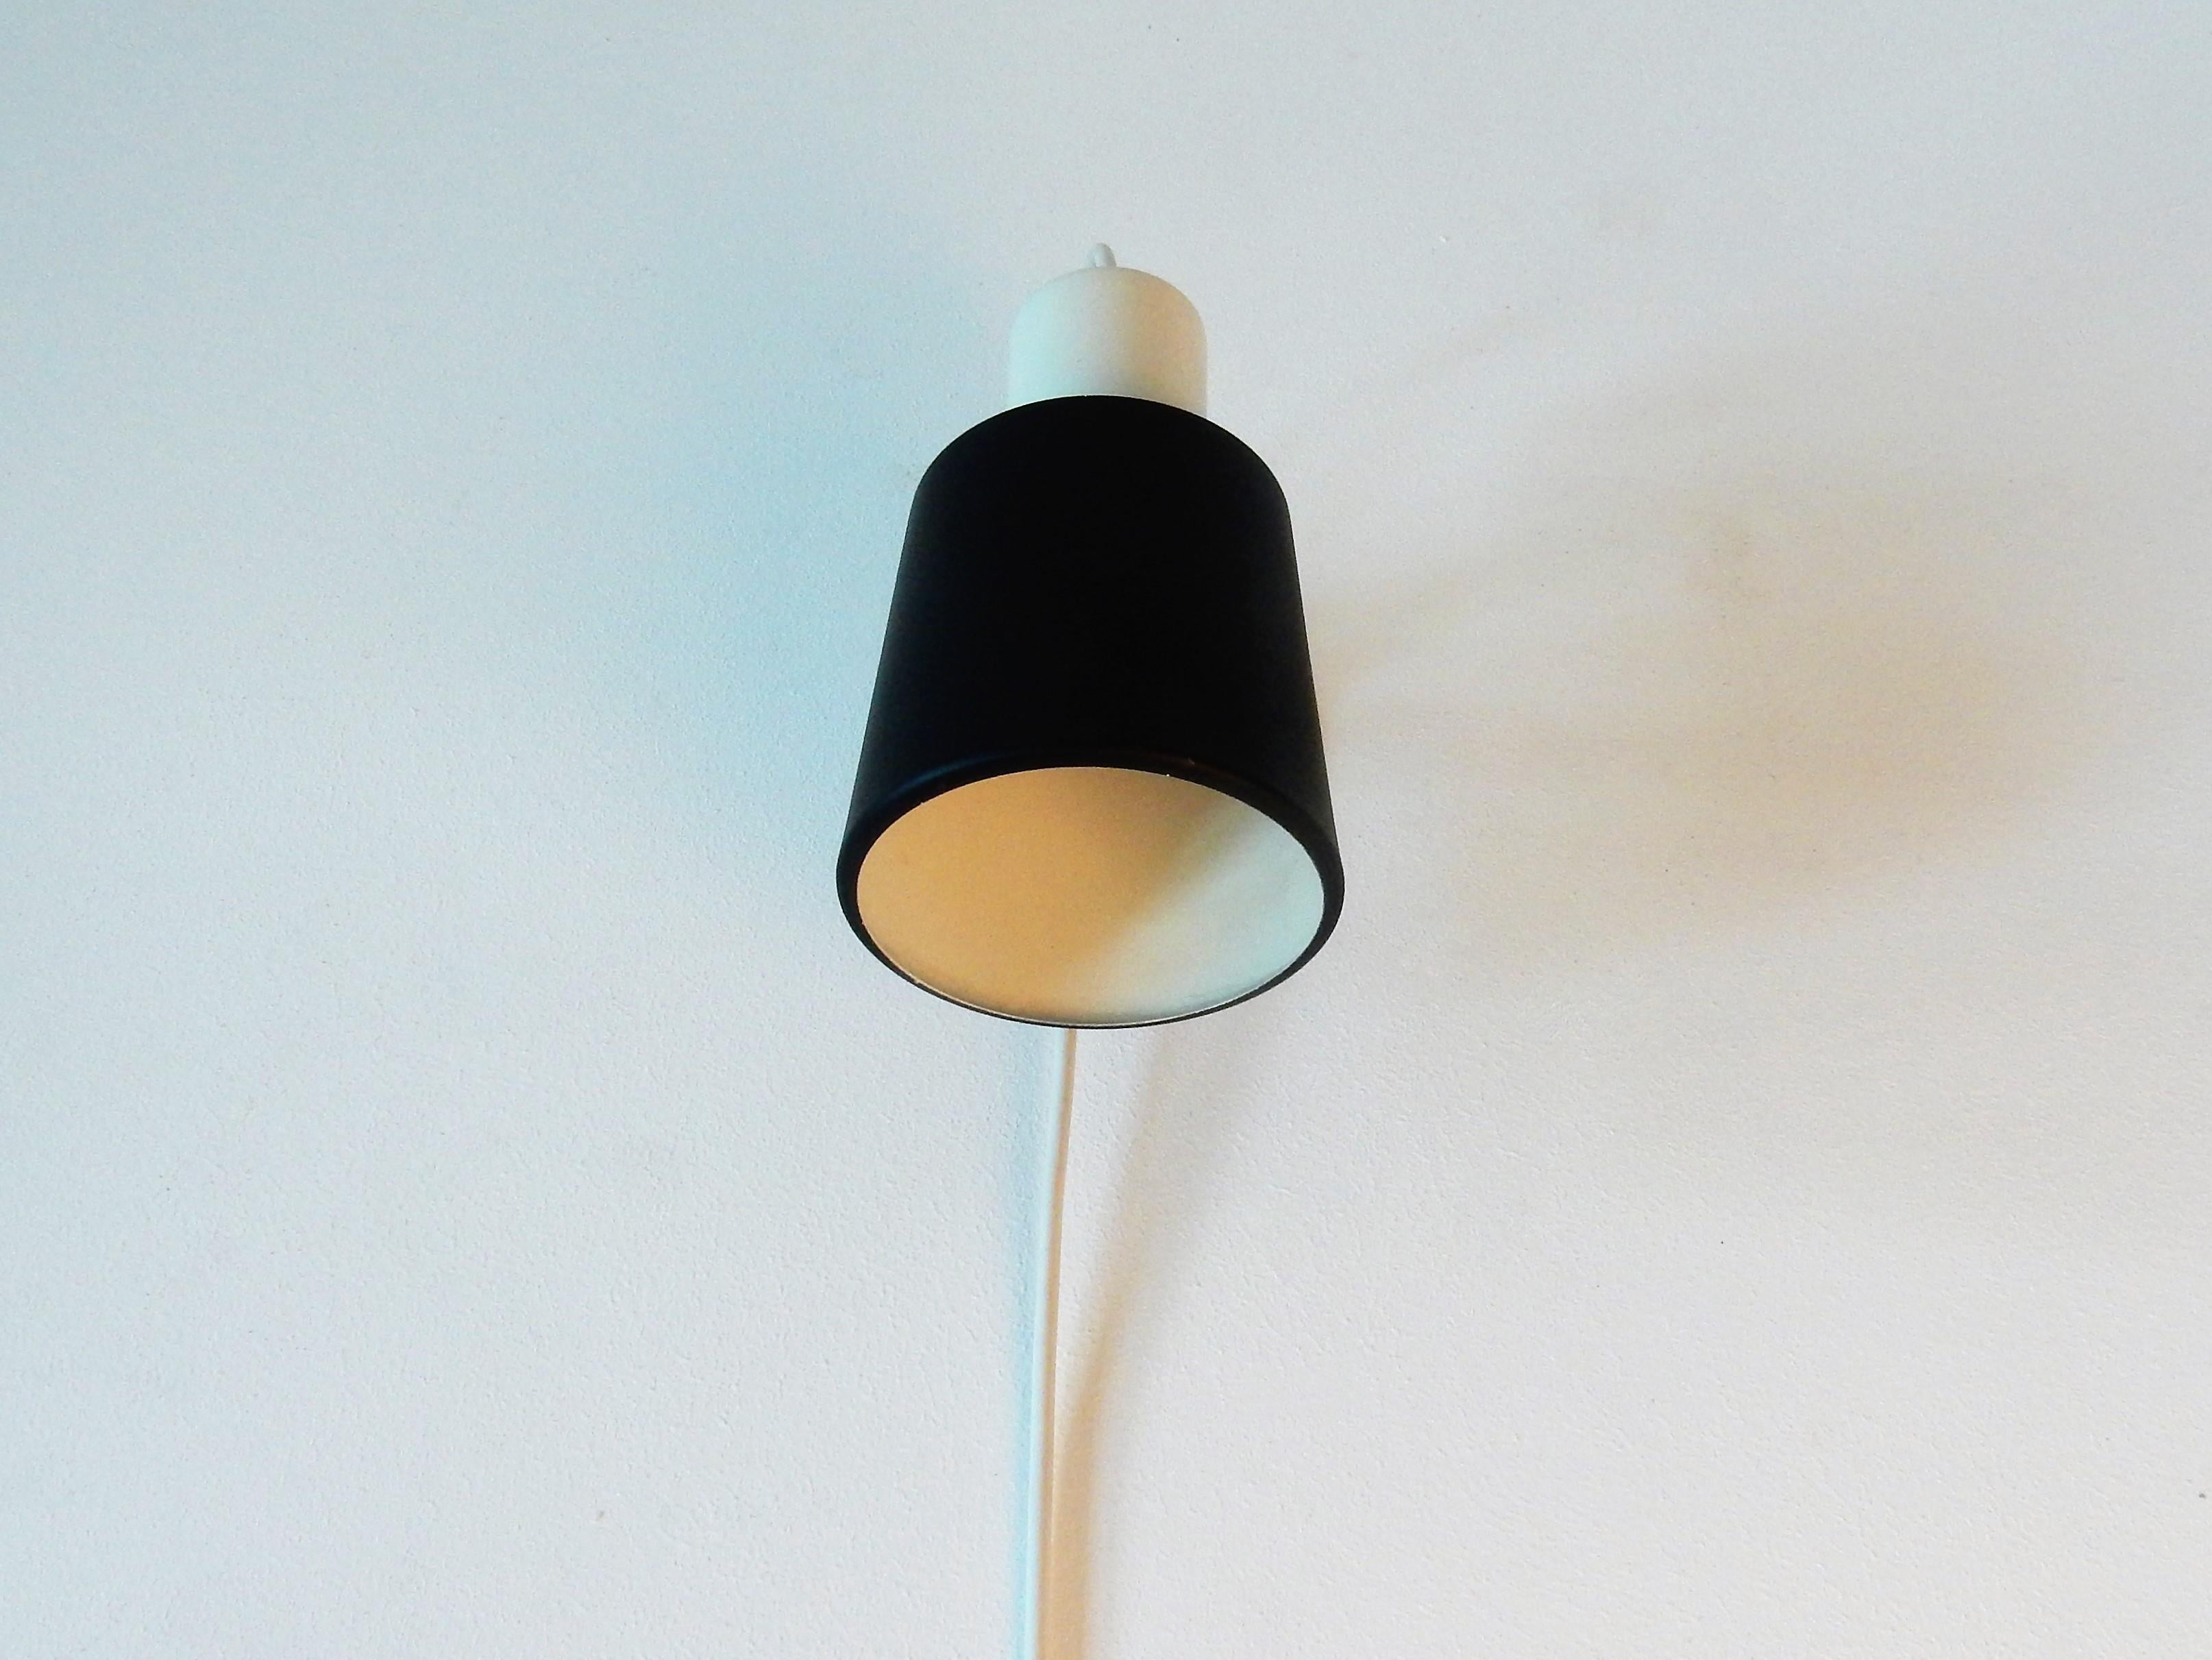 This nice and smart black and white Anvia wall lamp is a true beauty. It was most likely designed by Jan Hoogervorst in the 1960s and is documented in the Anvia catalogue as model 7062. The lamp can be turned in all directions to create a nice